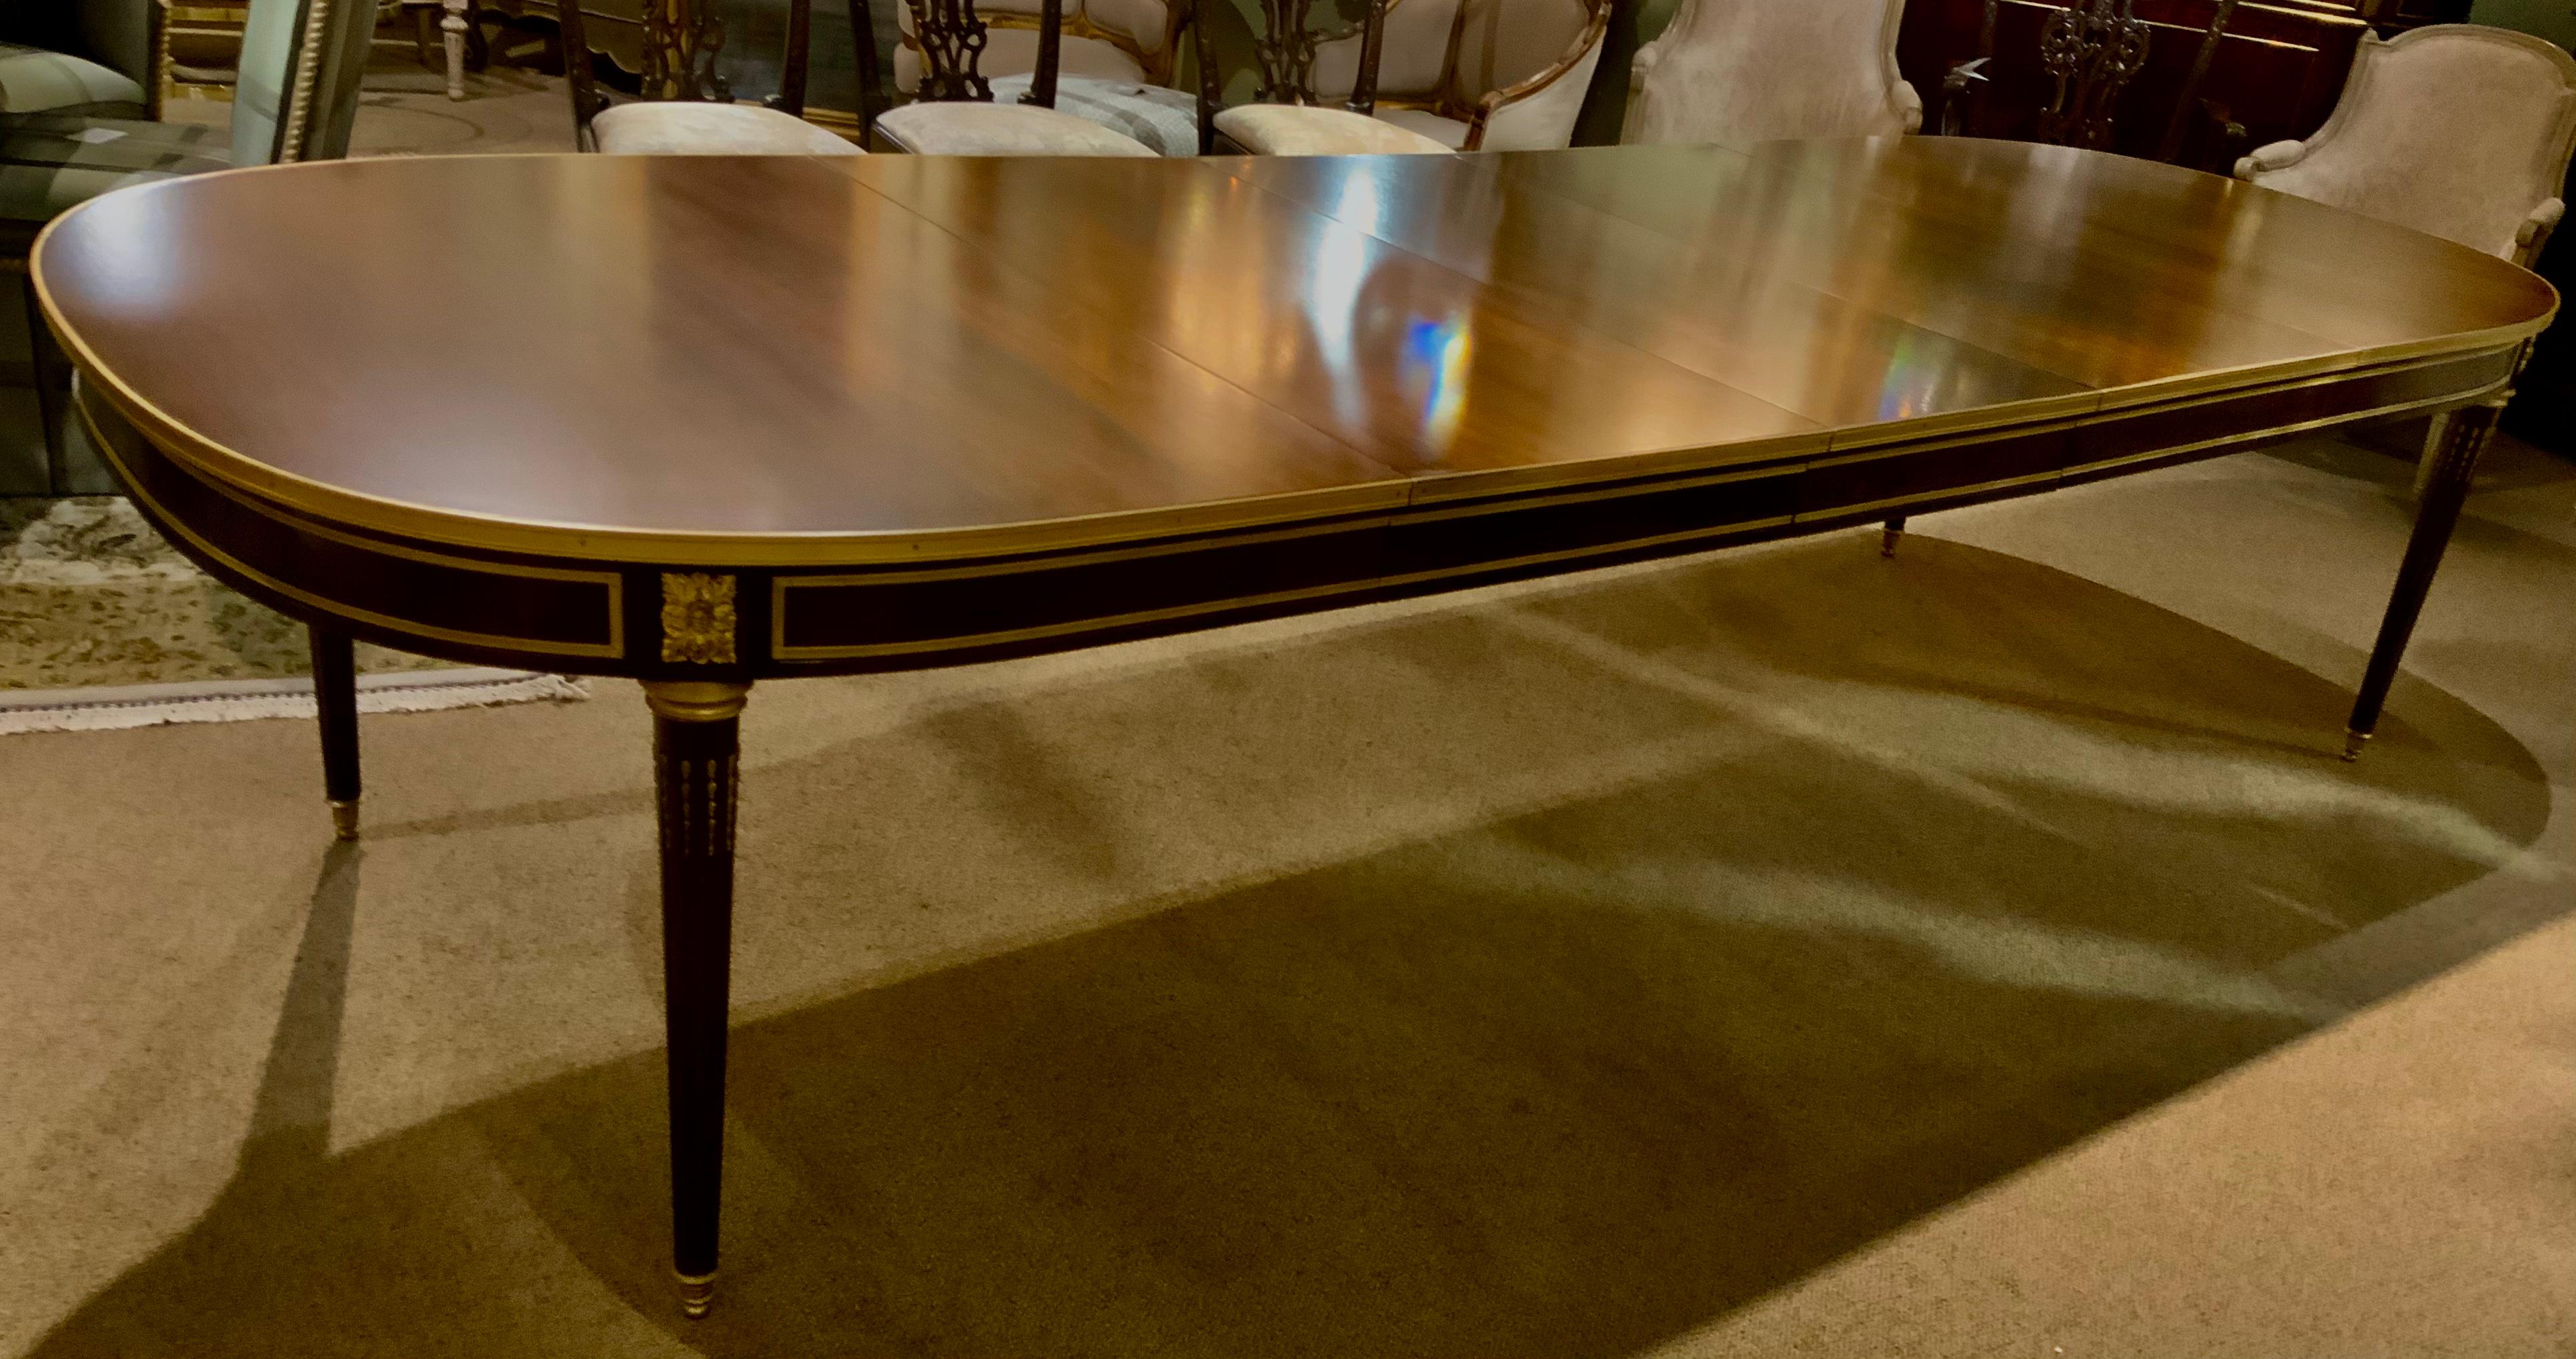 The mahogany wood in this table is exceptional with lovely 
Graining and a fine satin finish. A gilt metal band surrounds
The edge of the table top. The legs are reeded and have
Gilt metal embellishments. The apron on the table is 4” deep.
The